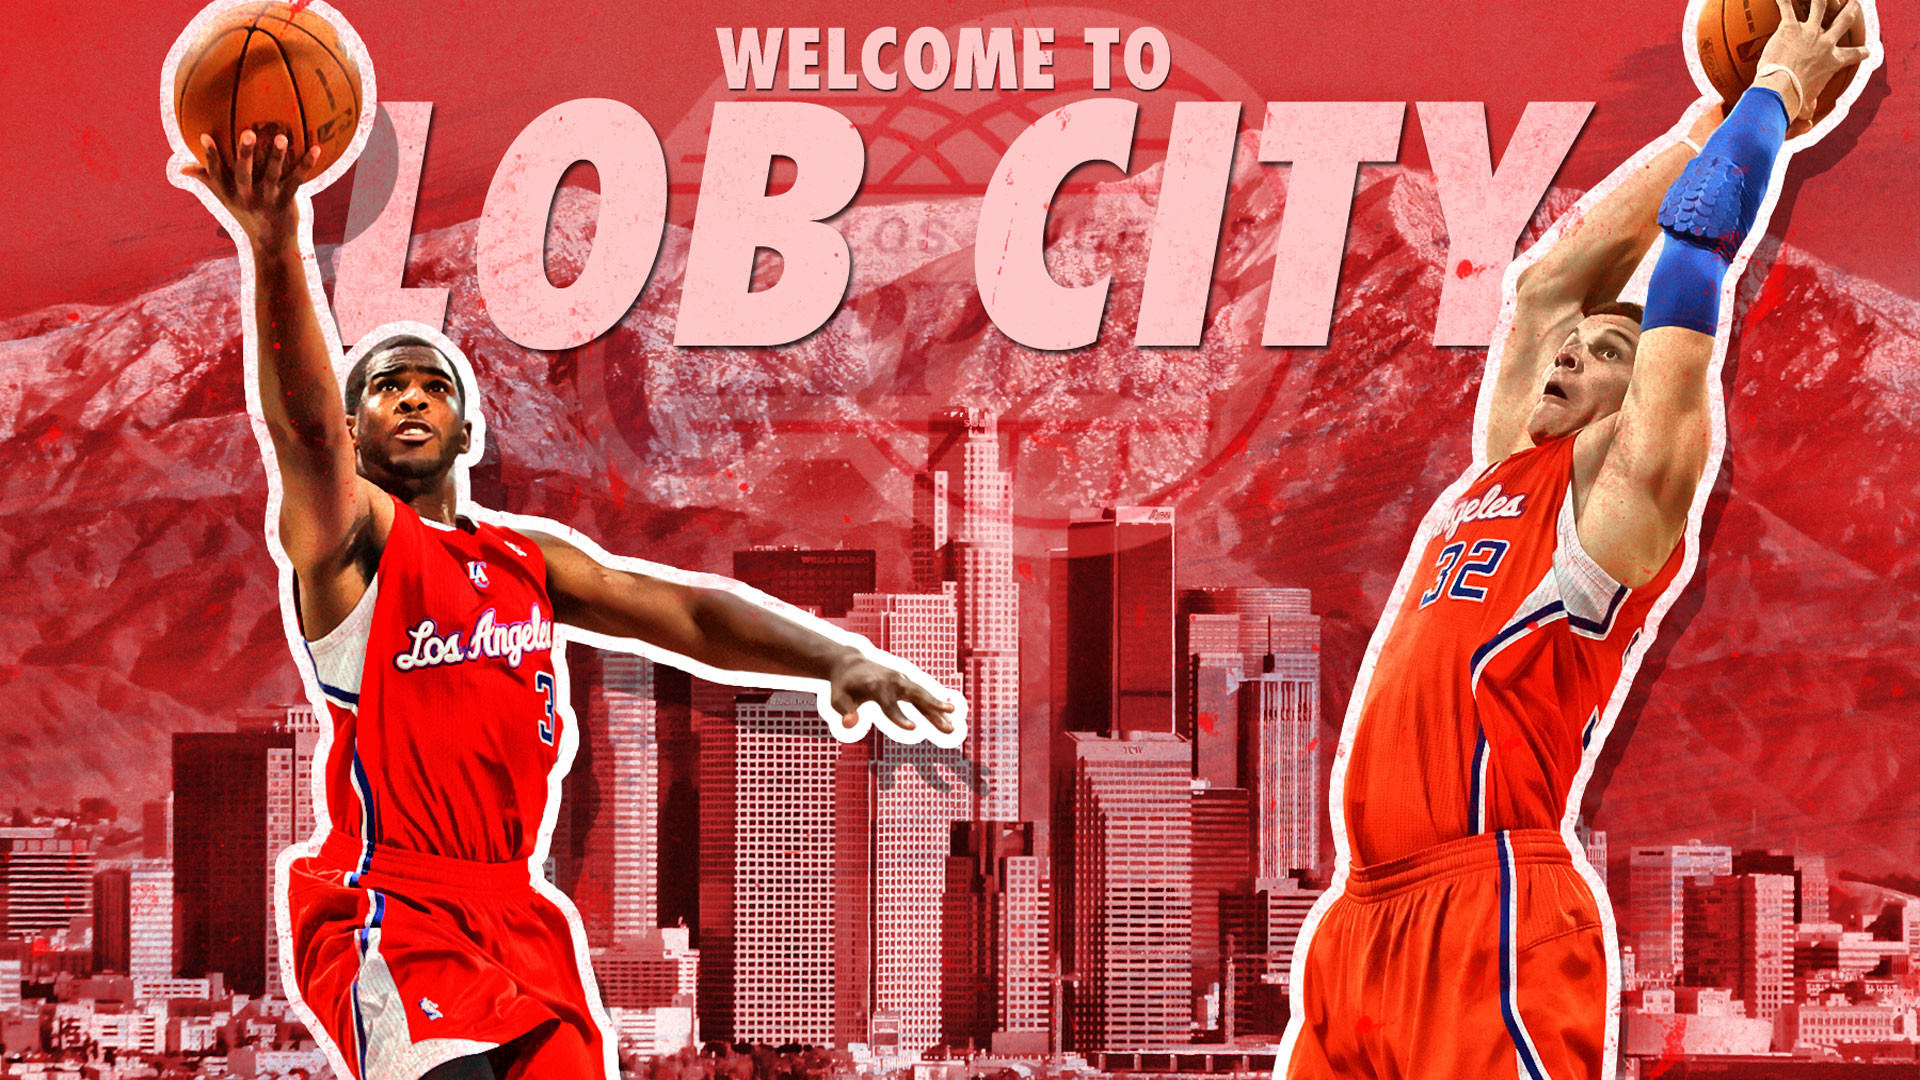 1920x1080 Clippers 2012 Welcome To Lob City Wallpaper